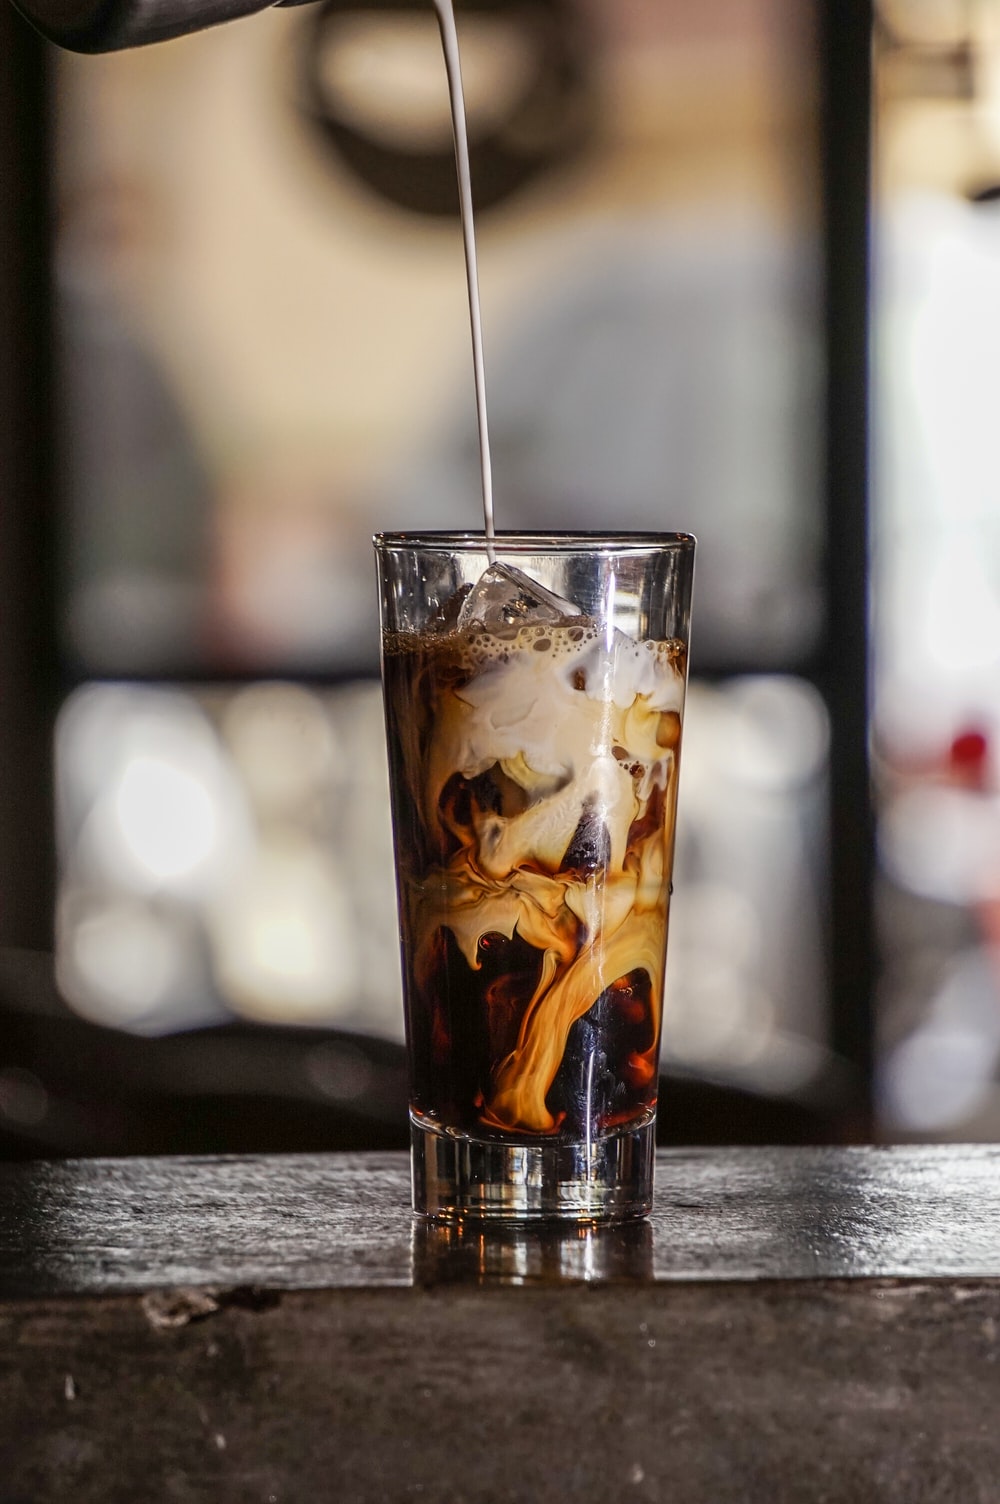 Iced Americano Picture. Download Free Image